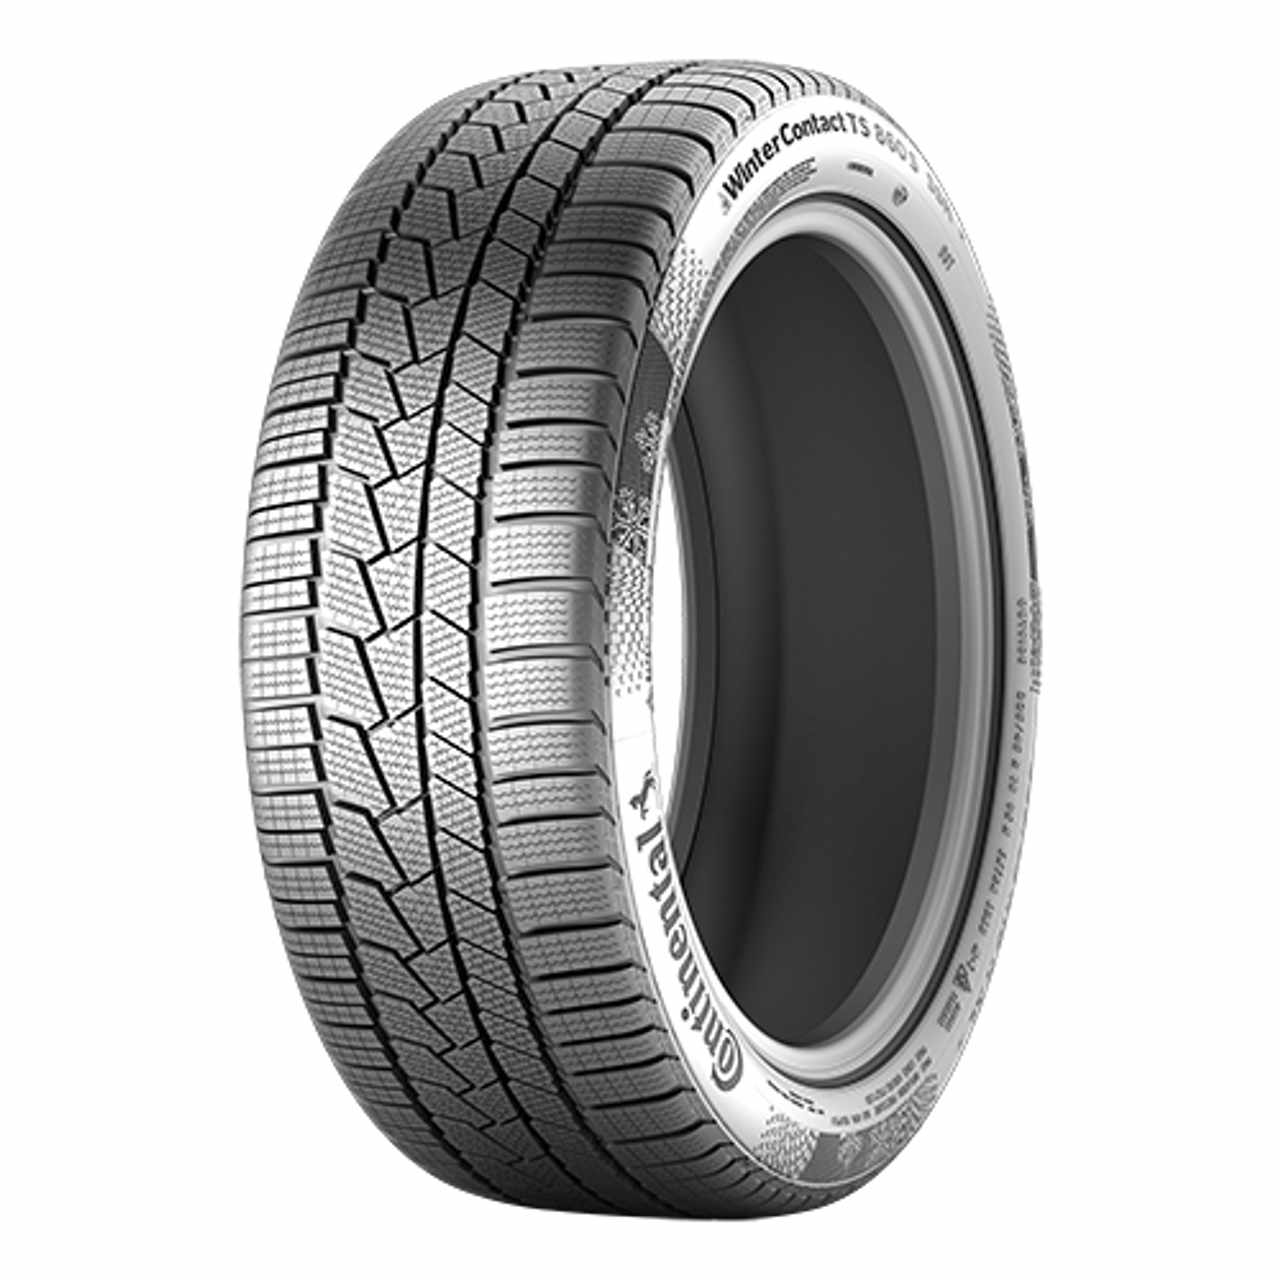 CONTINENTAL WINTERCONTACT TS 860 S (*) (EVc) 205/60R16 96H BSW von Continental